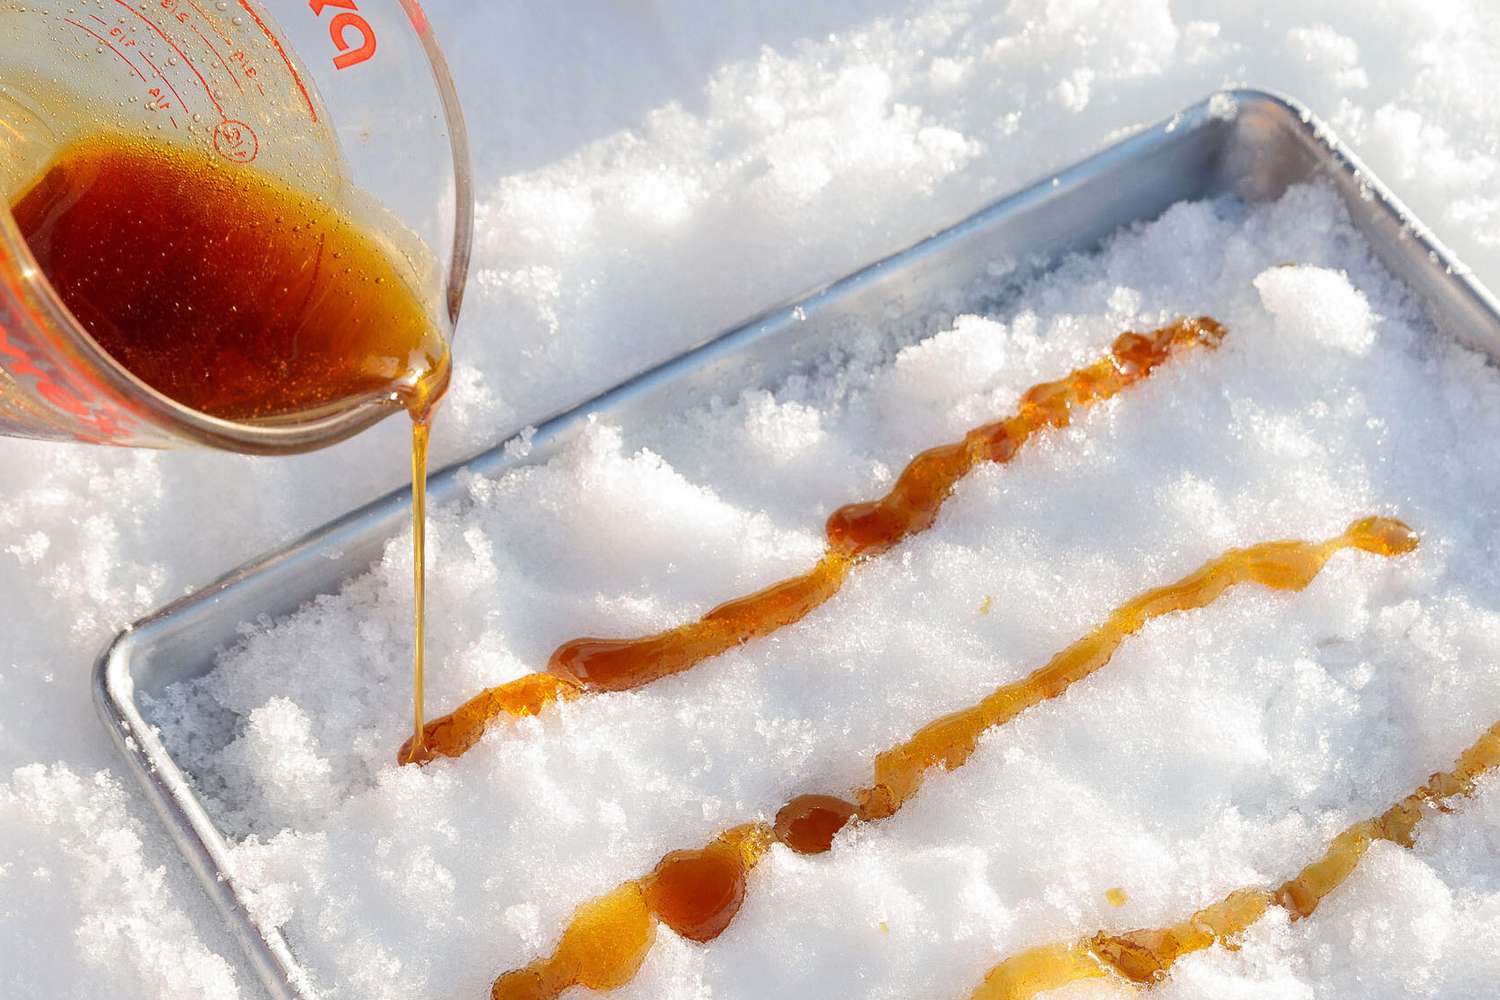 <p>On a winter day, you can't do better than this creative treat. To make it, you boil and then pour maple syrup into rows on a snow-lined tray. Roll the frozen syrup into sticks and you've got a chewy, irresistible candy. </p>
                          